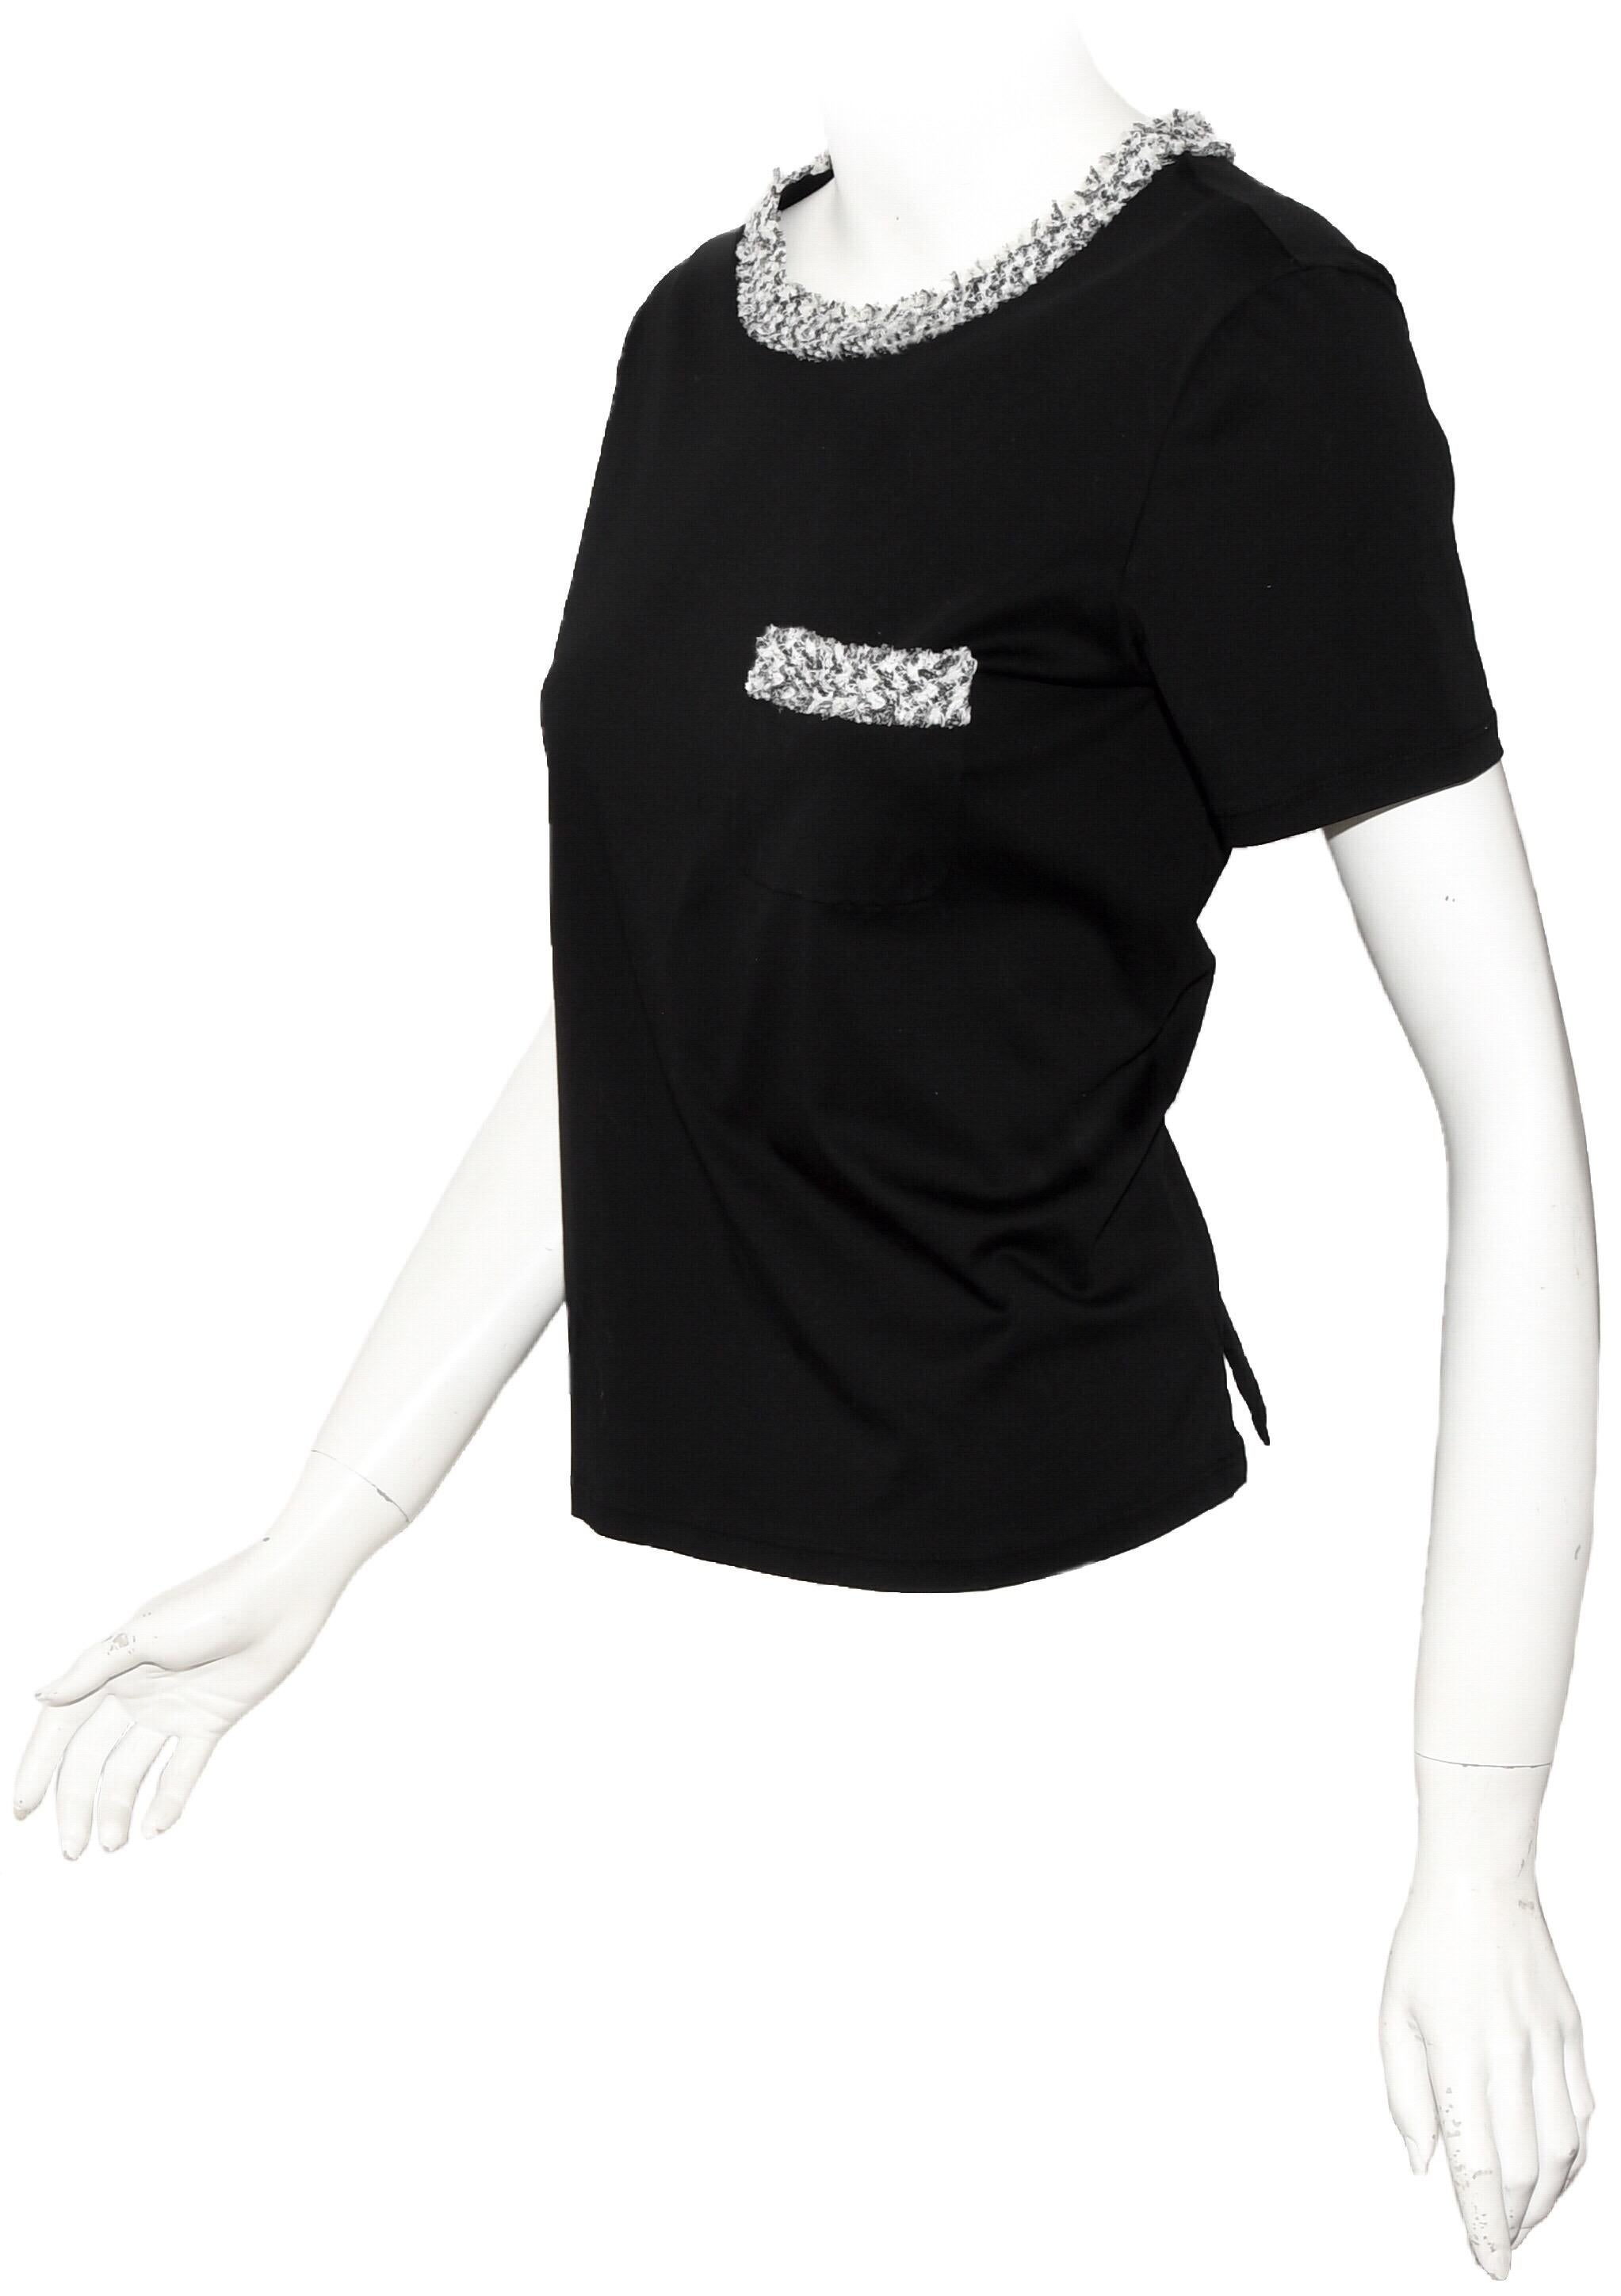 Chanel black cotton short sleeve T shirt contains black and white tweed trim around collar and chest pocket.   This top is not lined.   For closure, a small peep hole at back, also, slits at each side.  This top in excellent condition.  Made in